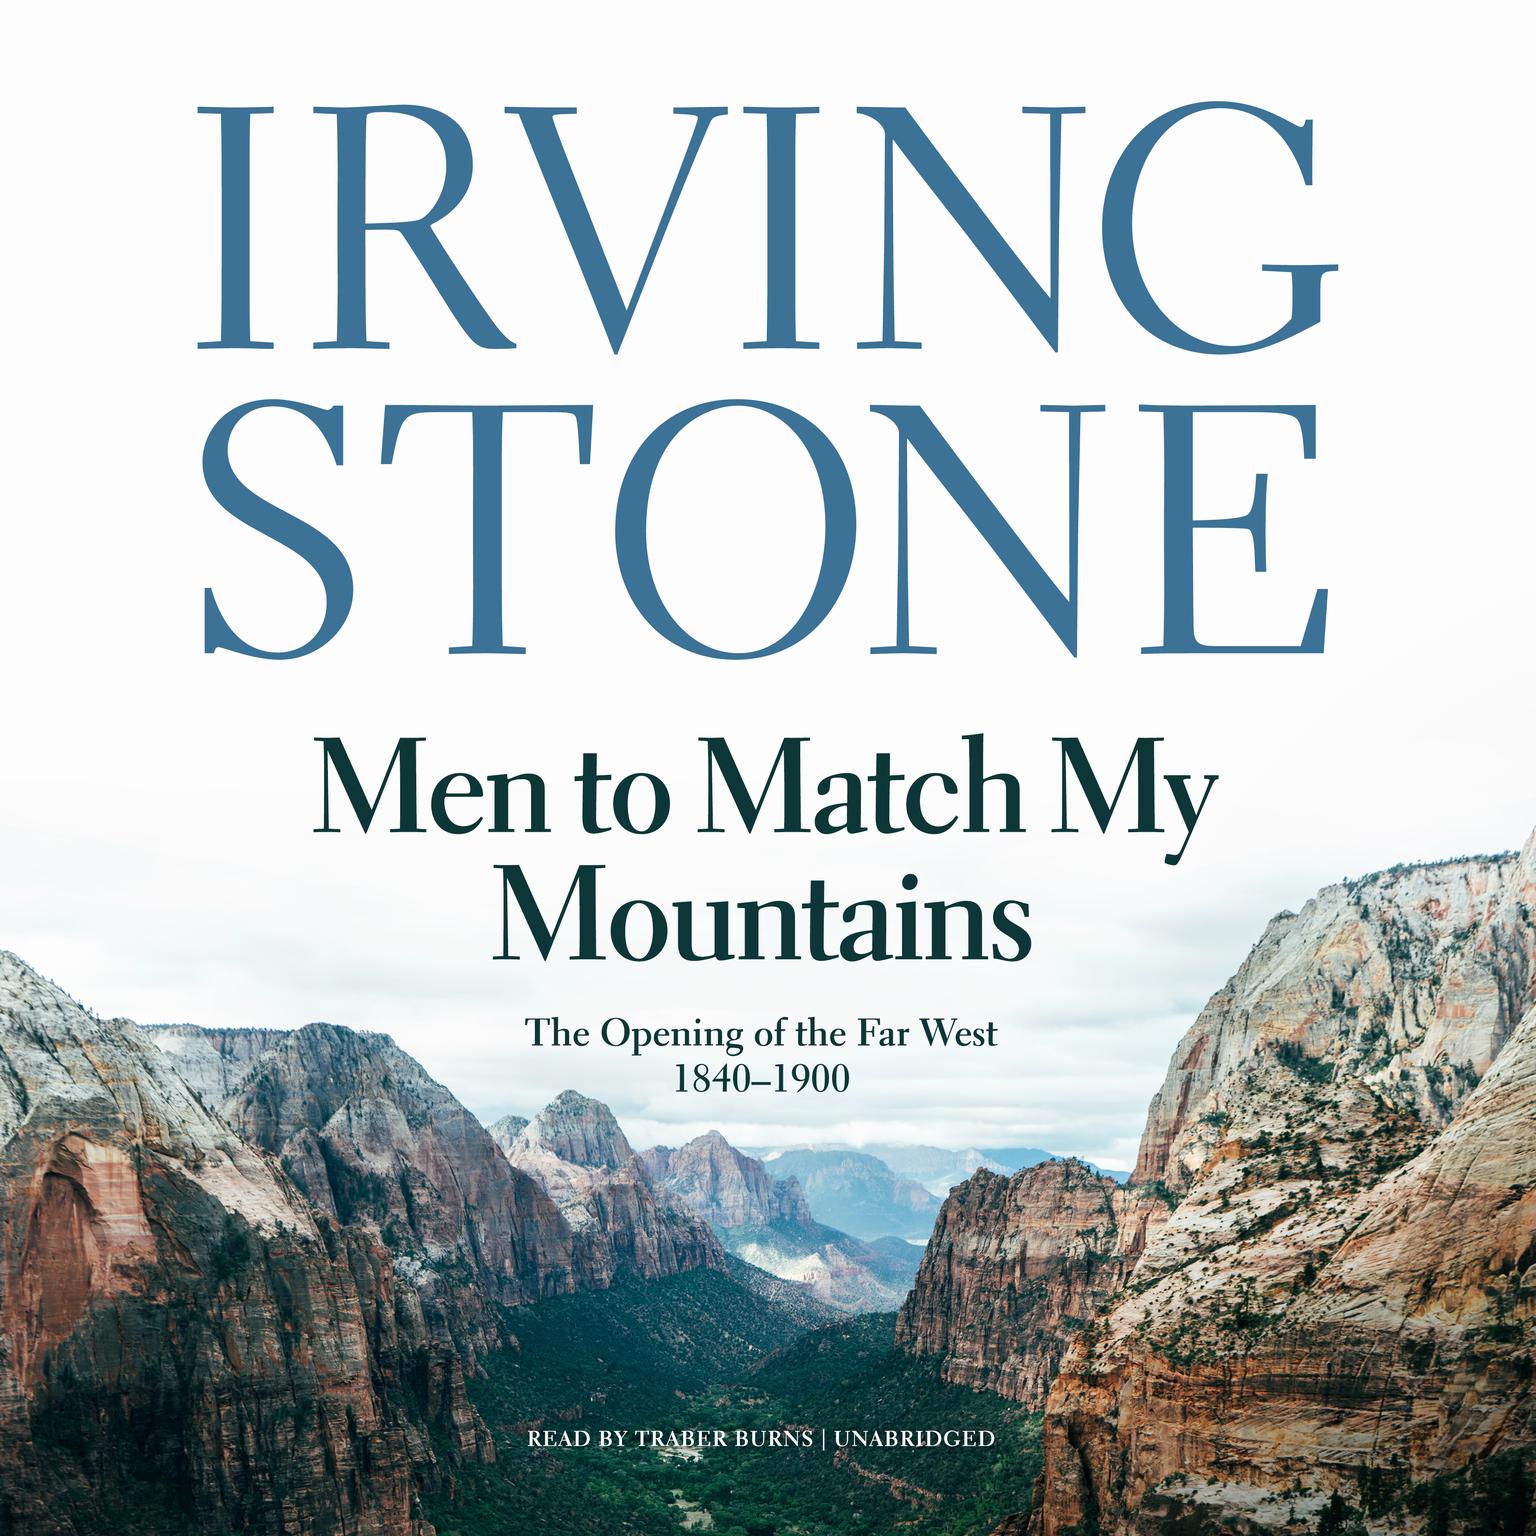 Men to Match My Mountains: The Opening of the Far West, 1840–1900 Audiobook, by Irving Stone